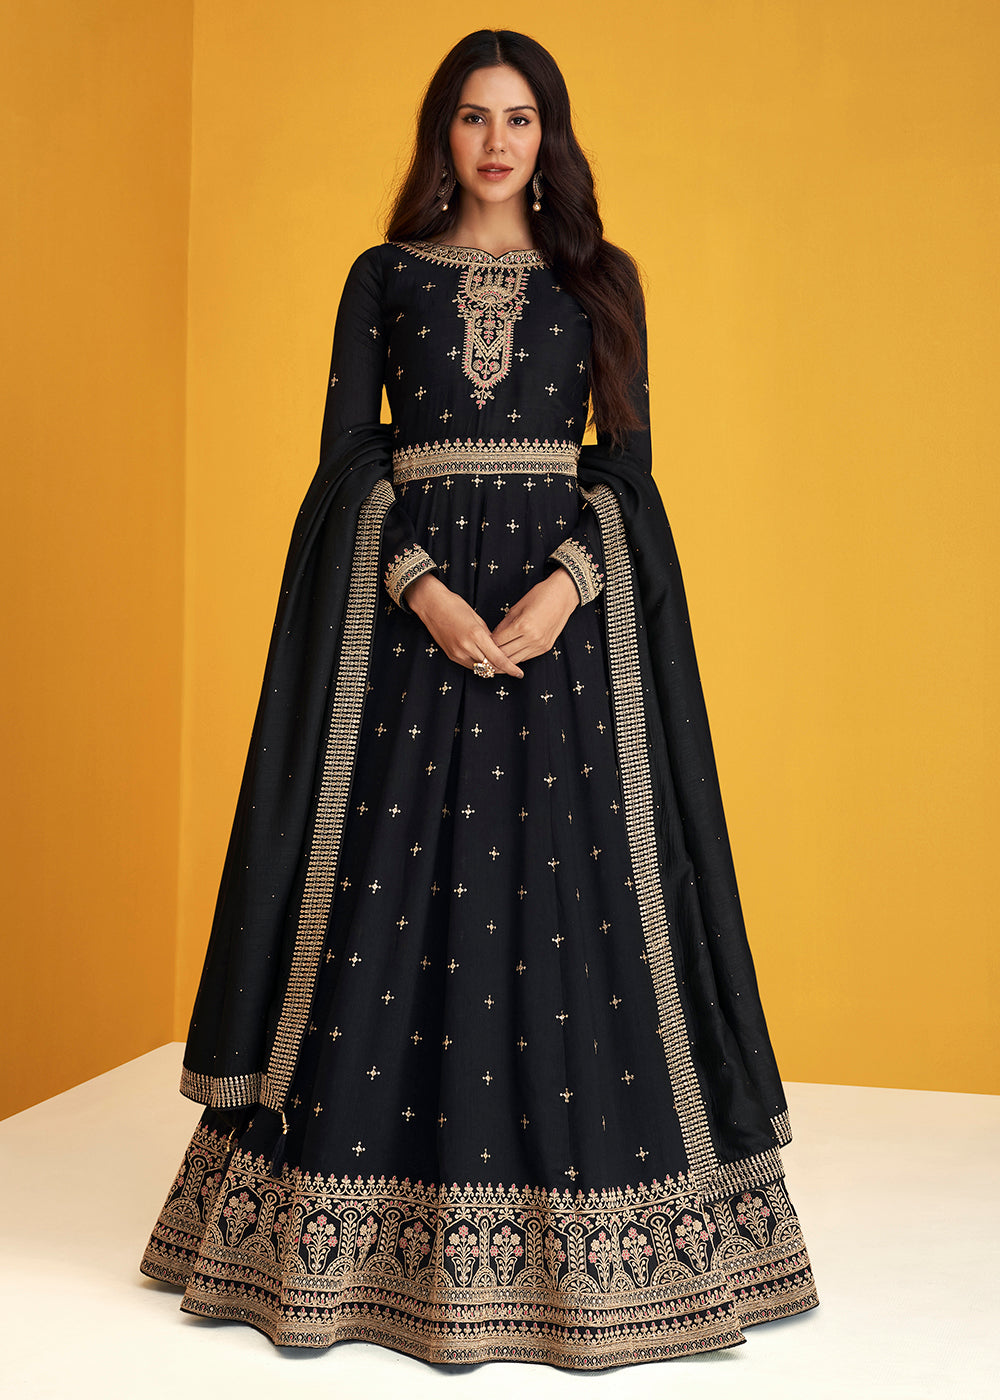 Shop Now Fabulous Black Silk Festive Anarkali Suit Online featuring Sonam Bajwa at Empress Clothing in USA.